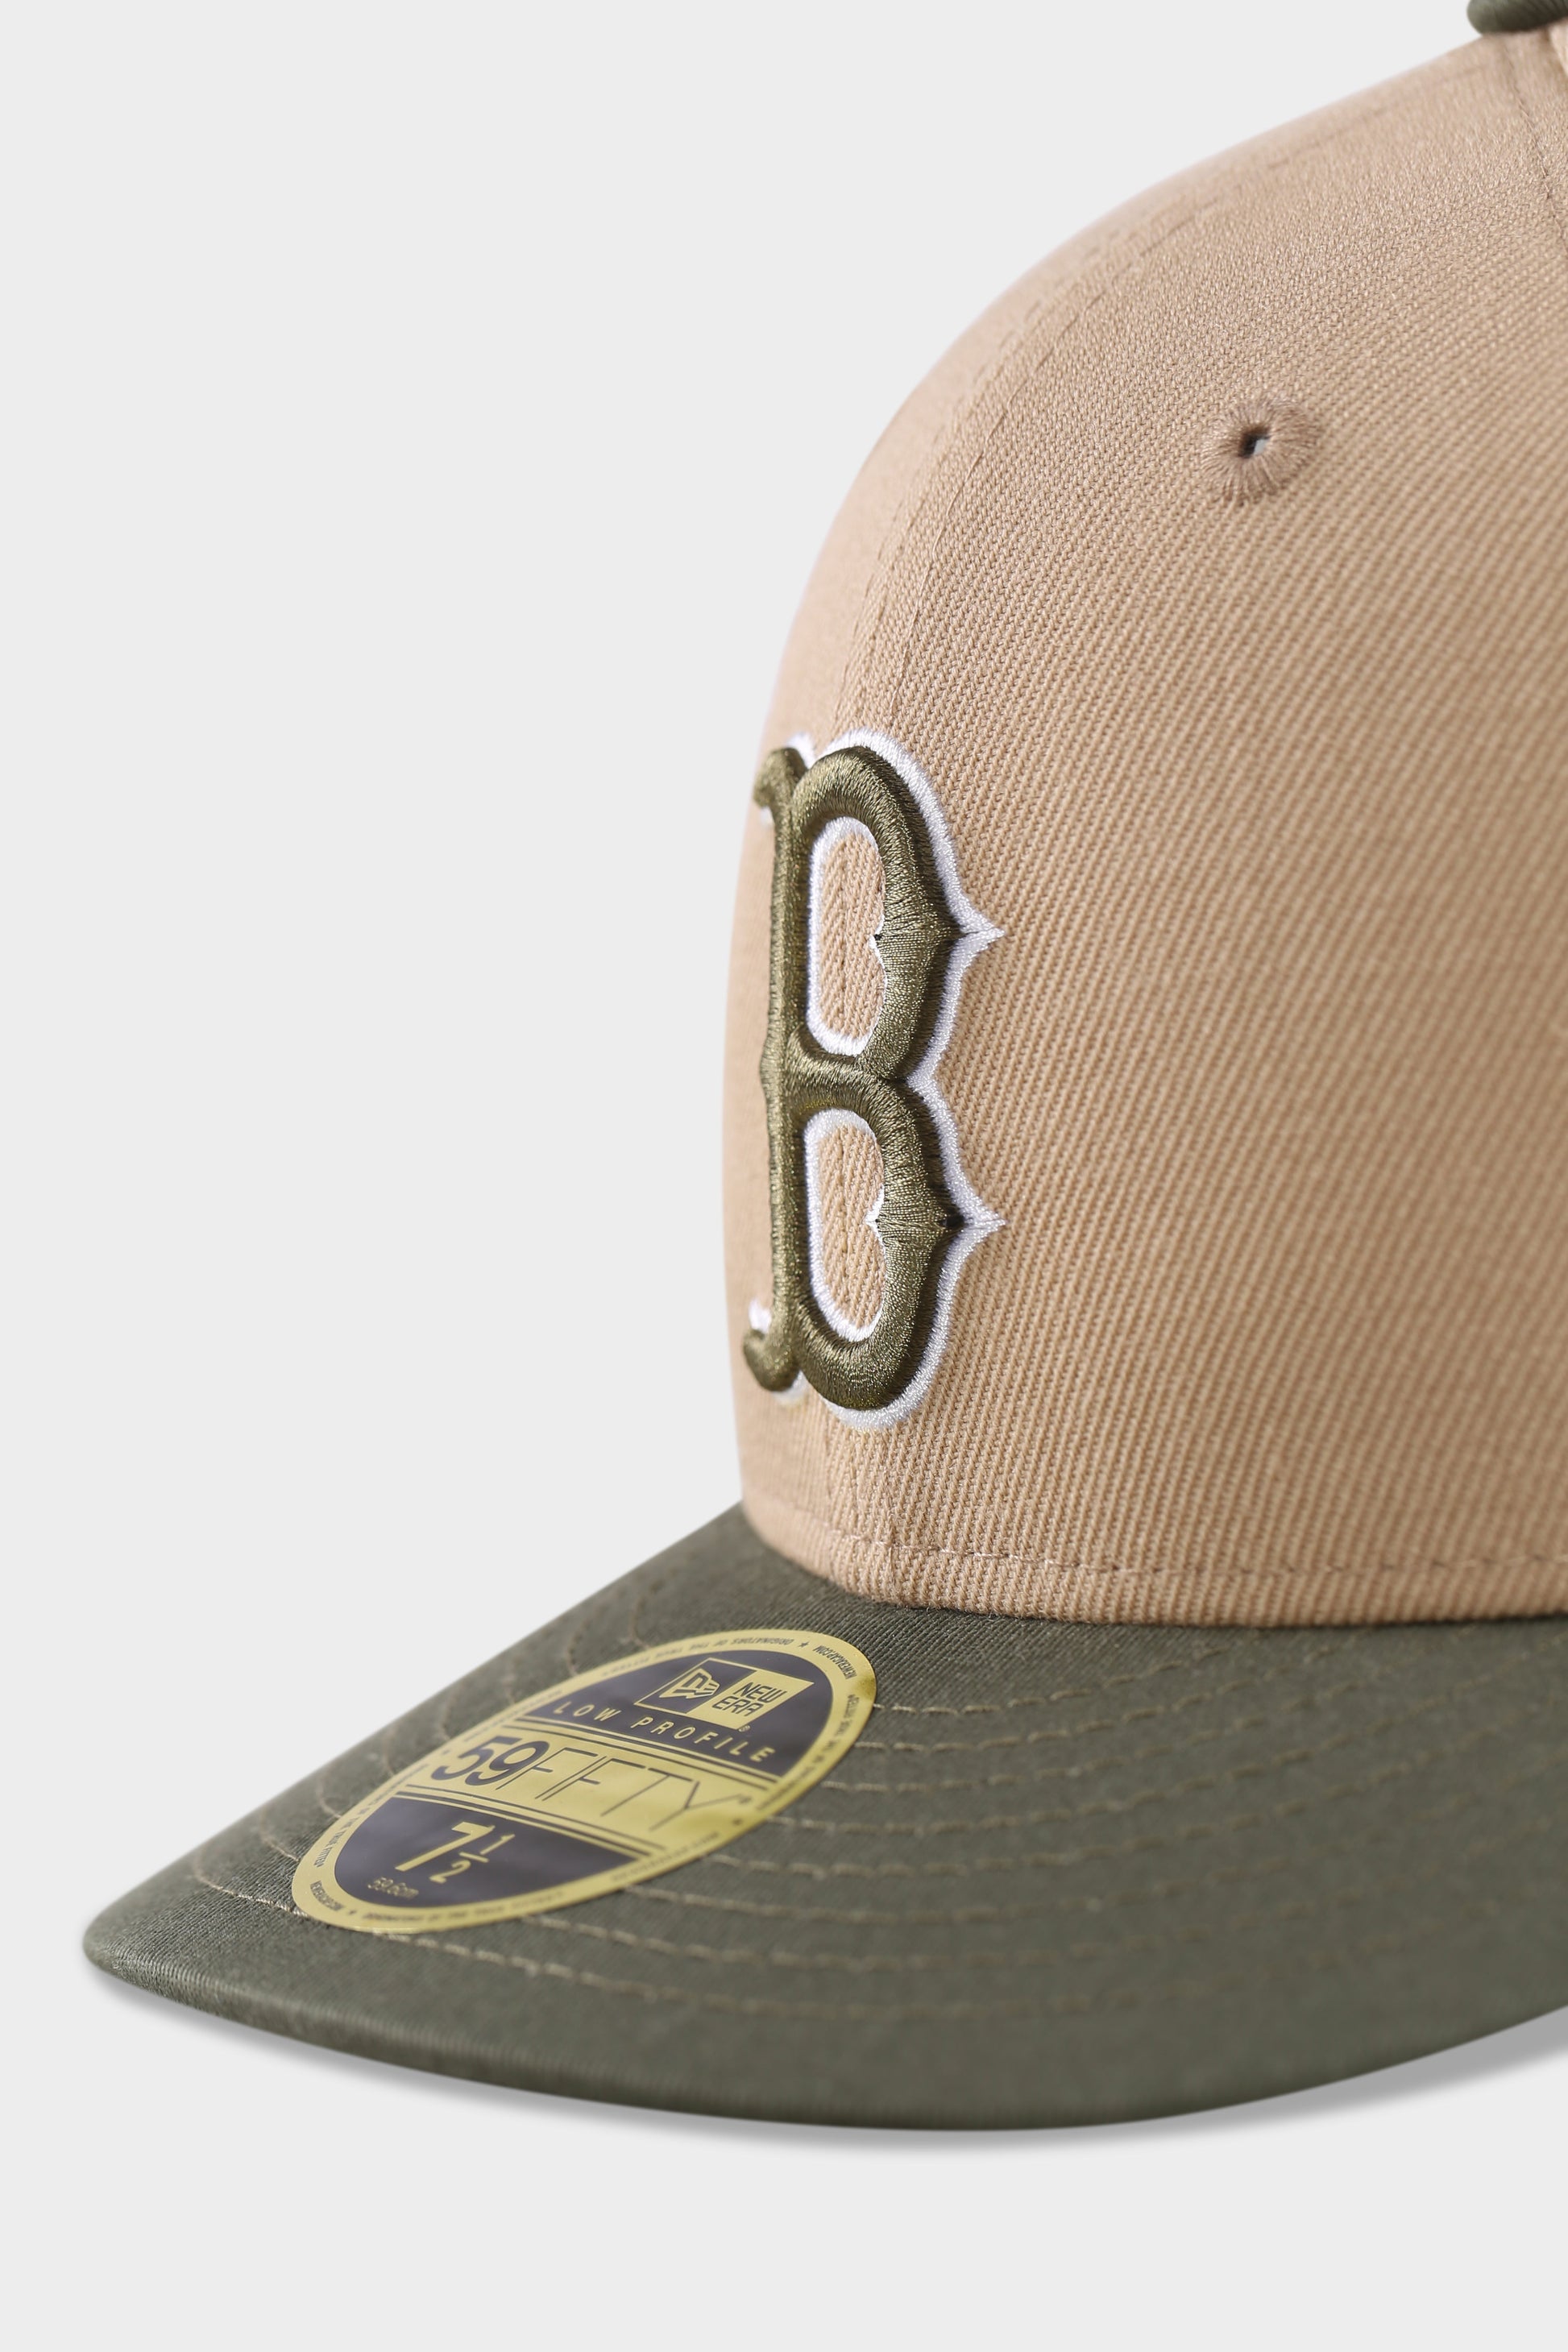 New Era 5950 Red Sox Camel/New Olive Detail